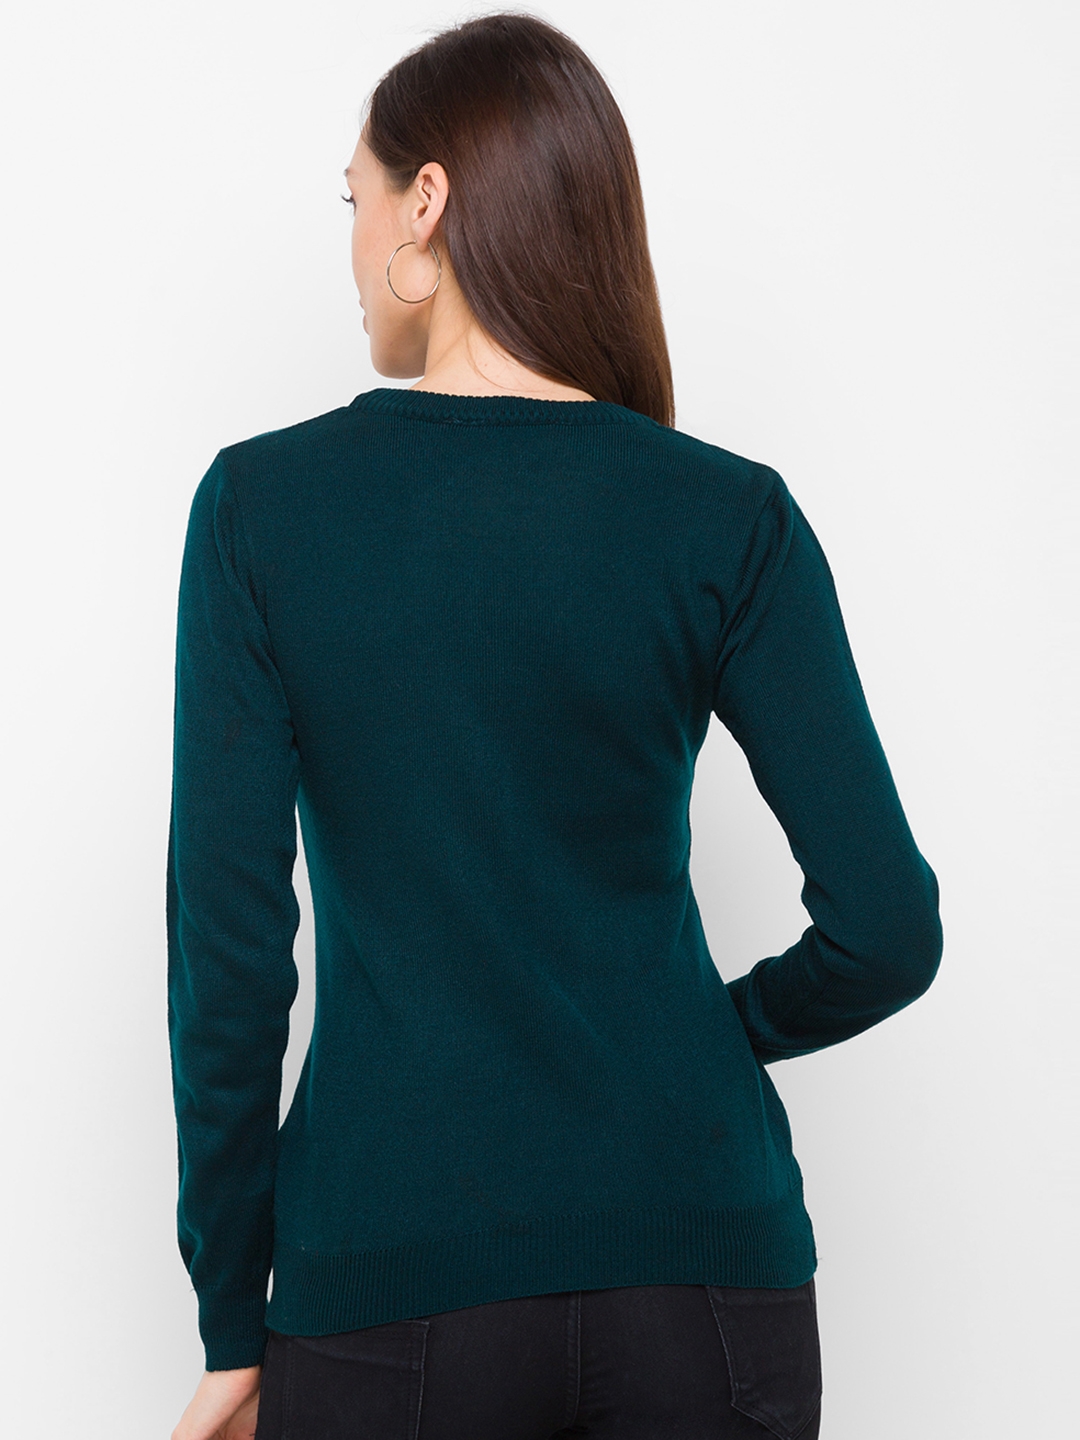 globus | Green Solid Sweater 2